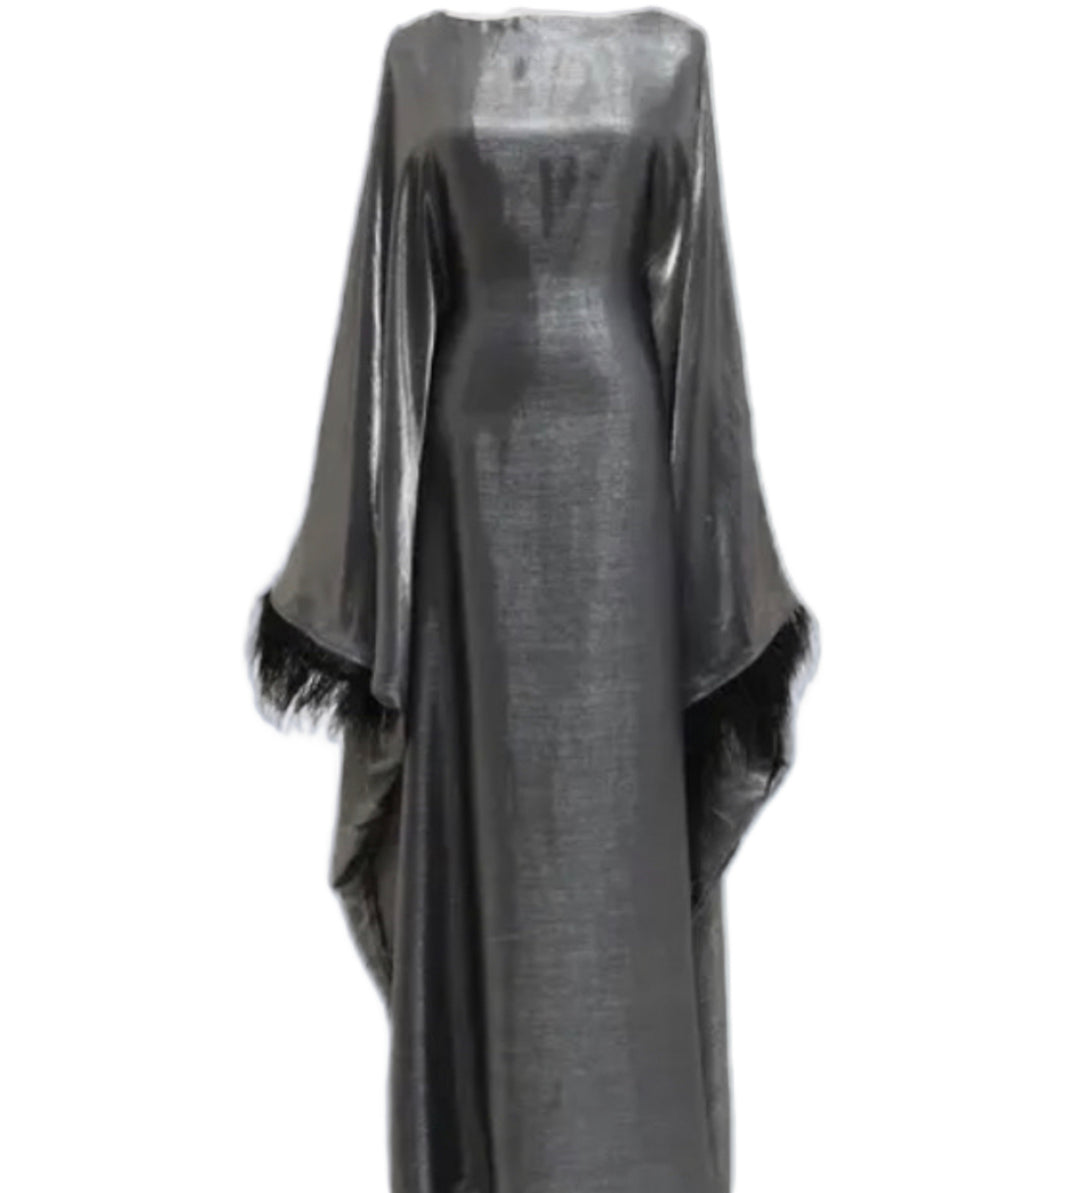 Silver bat wing abaya with inner belt and feathers.